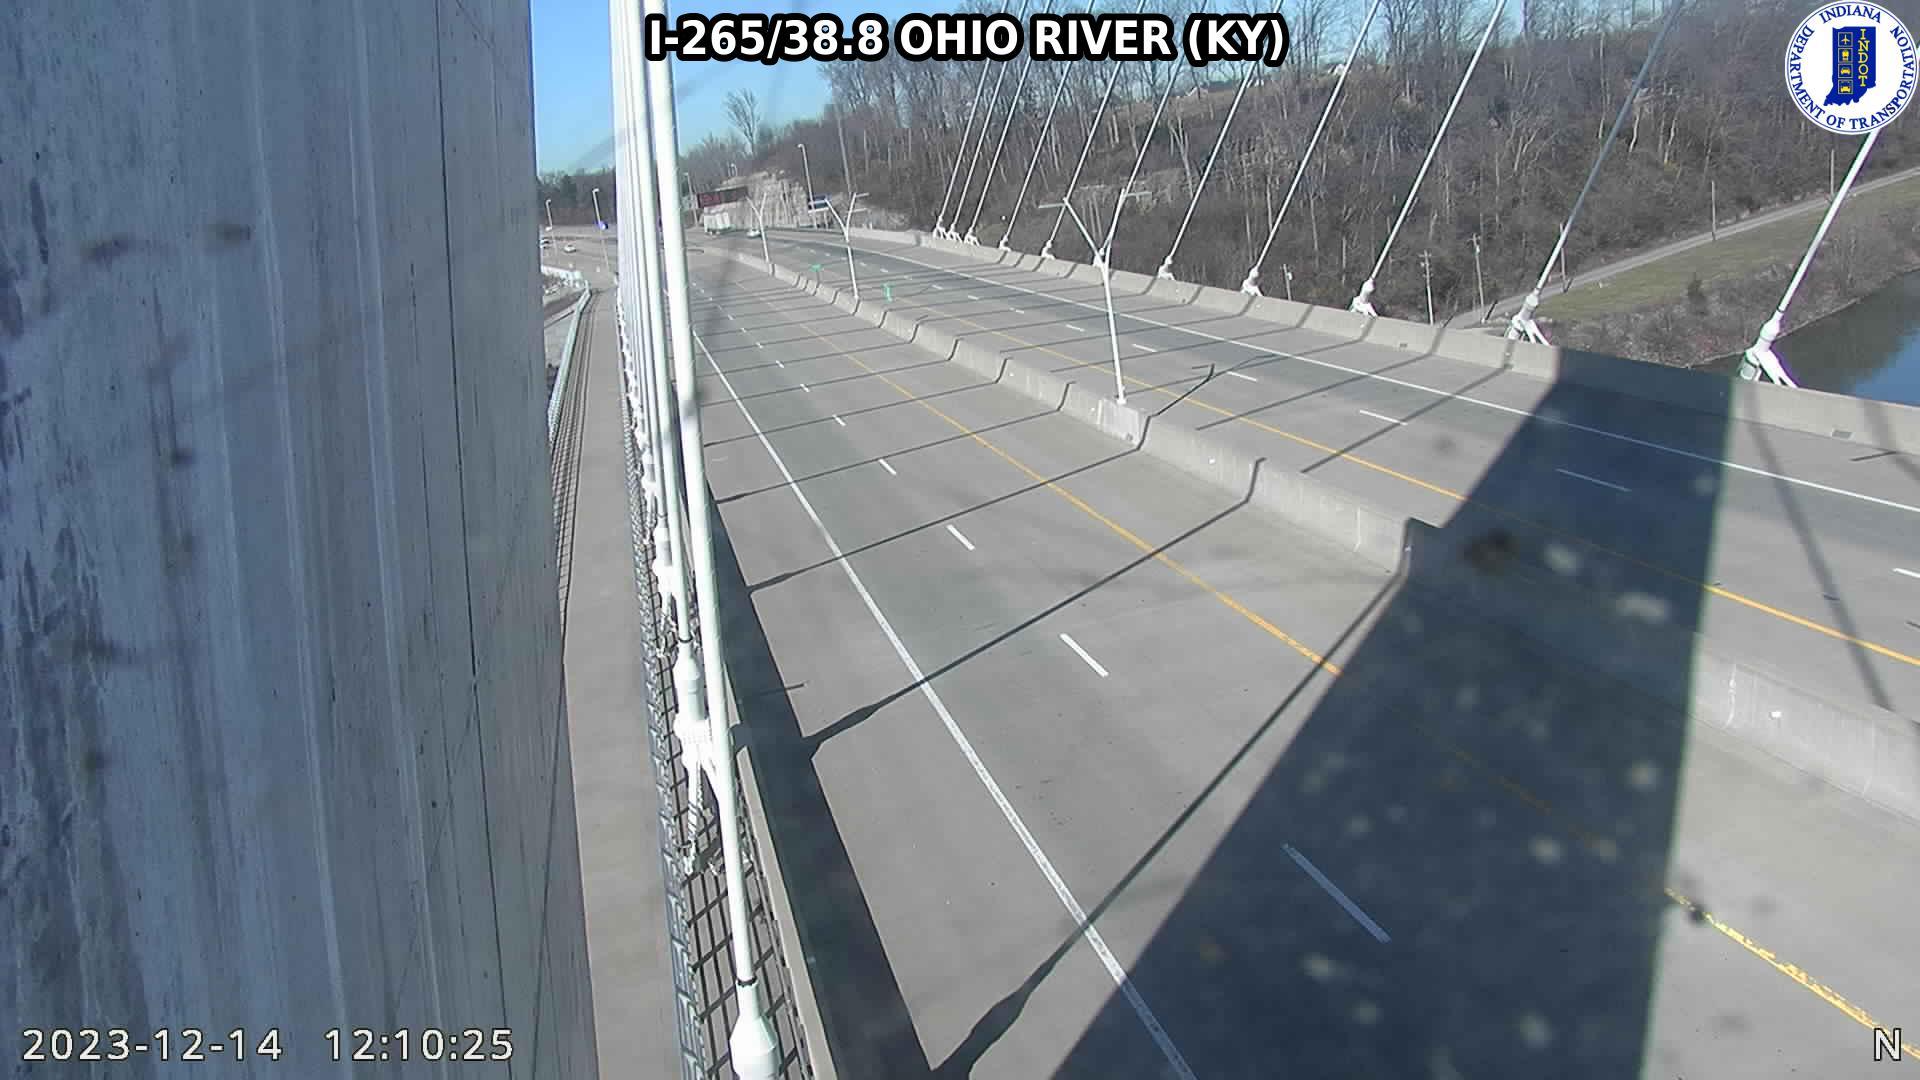 Traffic Cam Louisville: KY I-265: I-265/38.8 OHIO RIVER (KY) Player